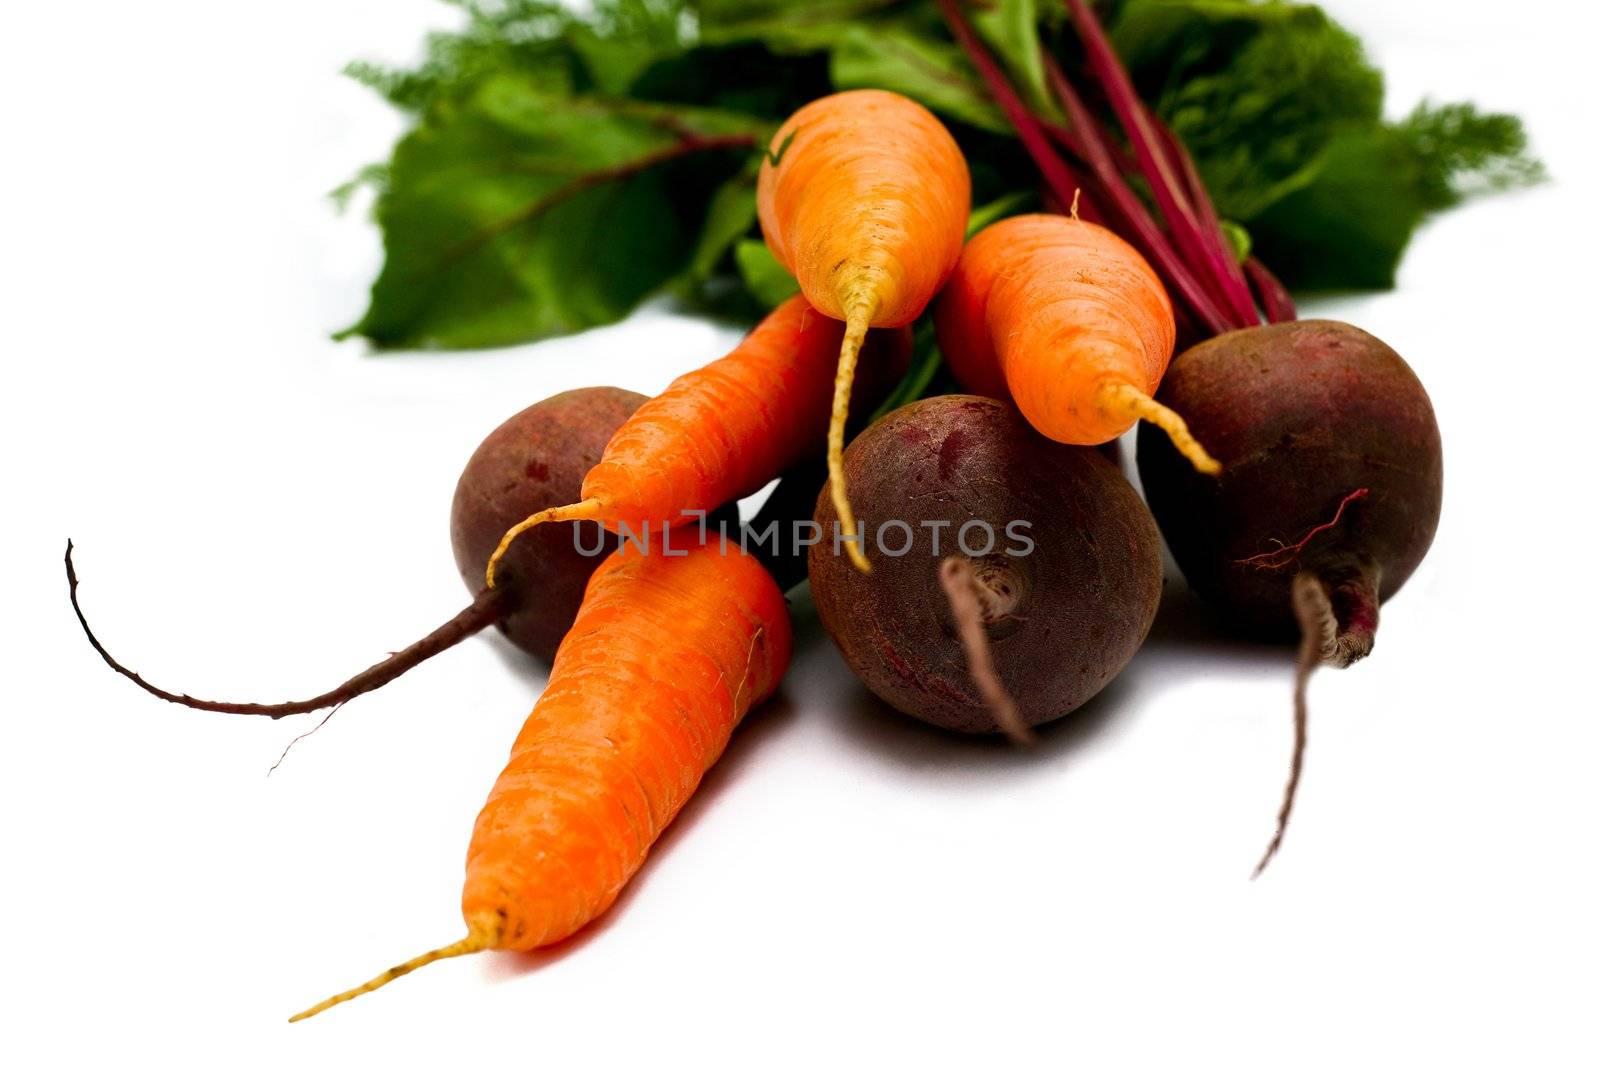 An image of fresh beets and carrots with green leaves